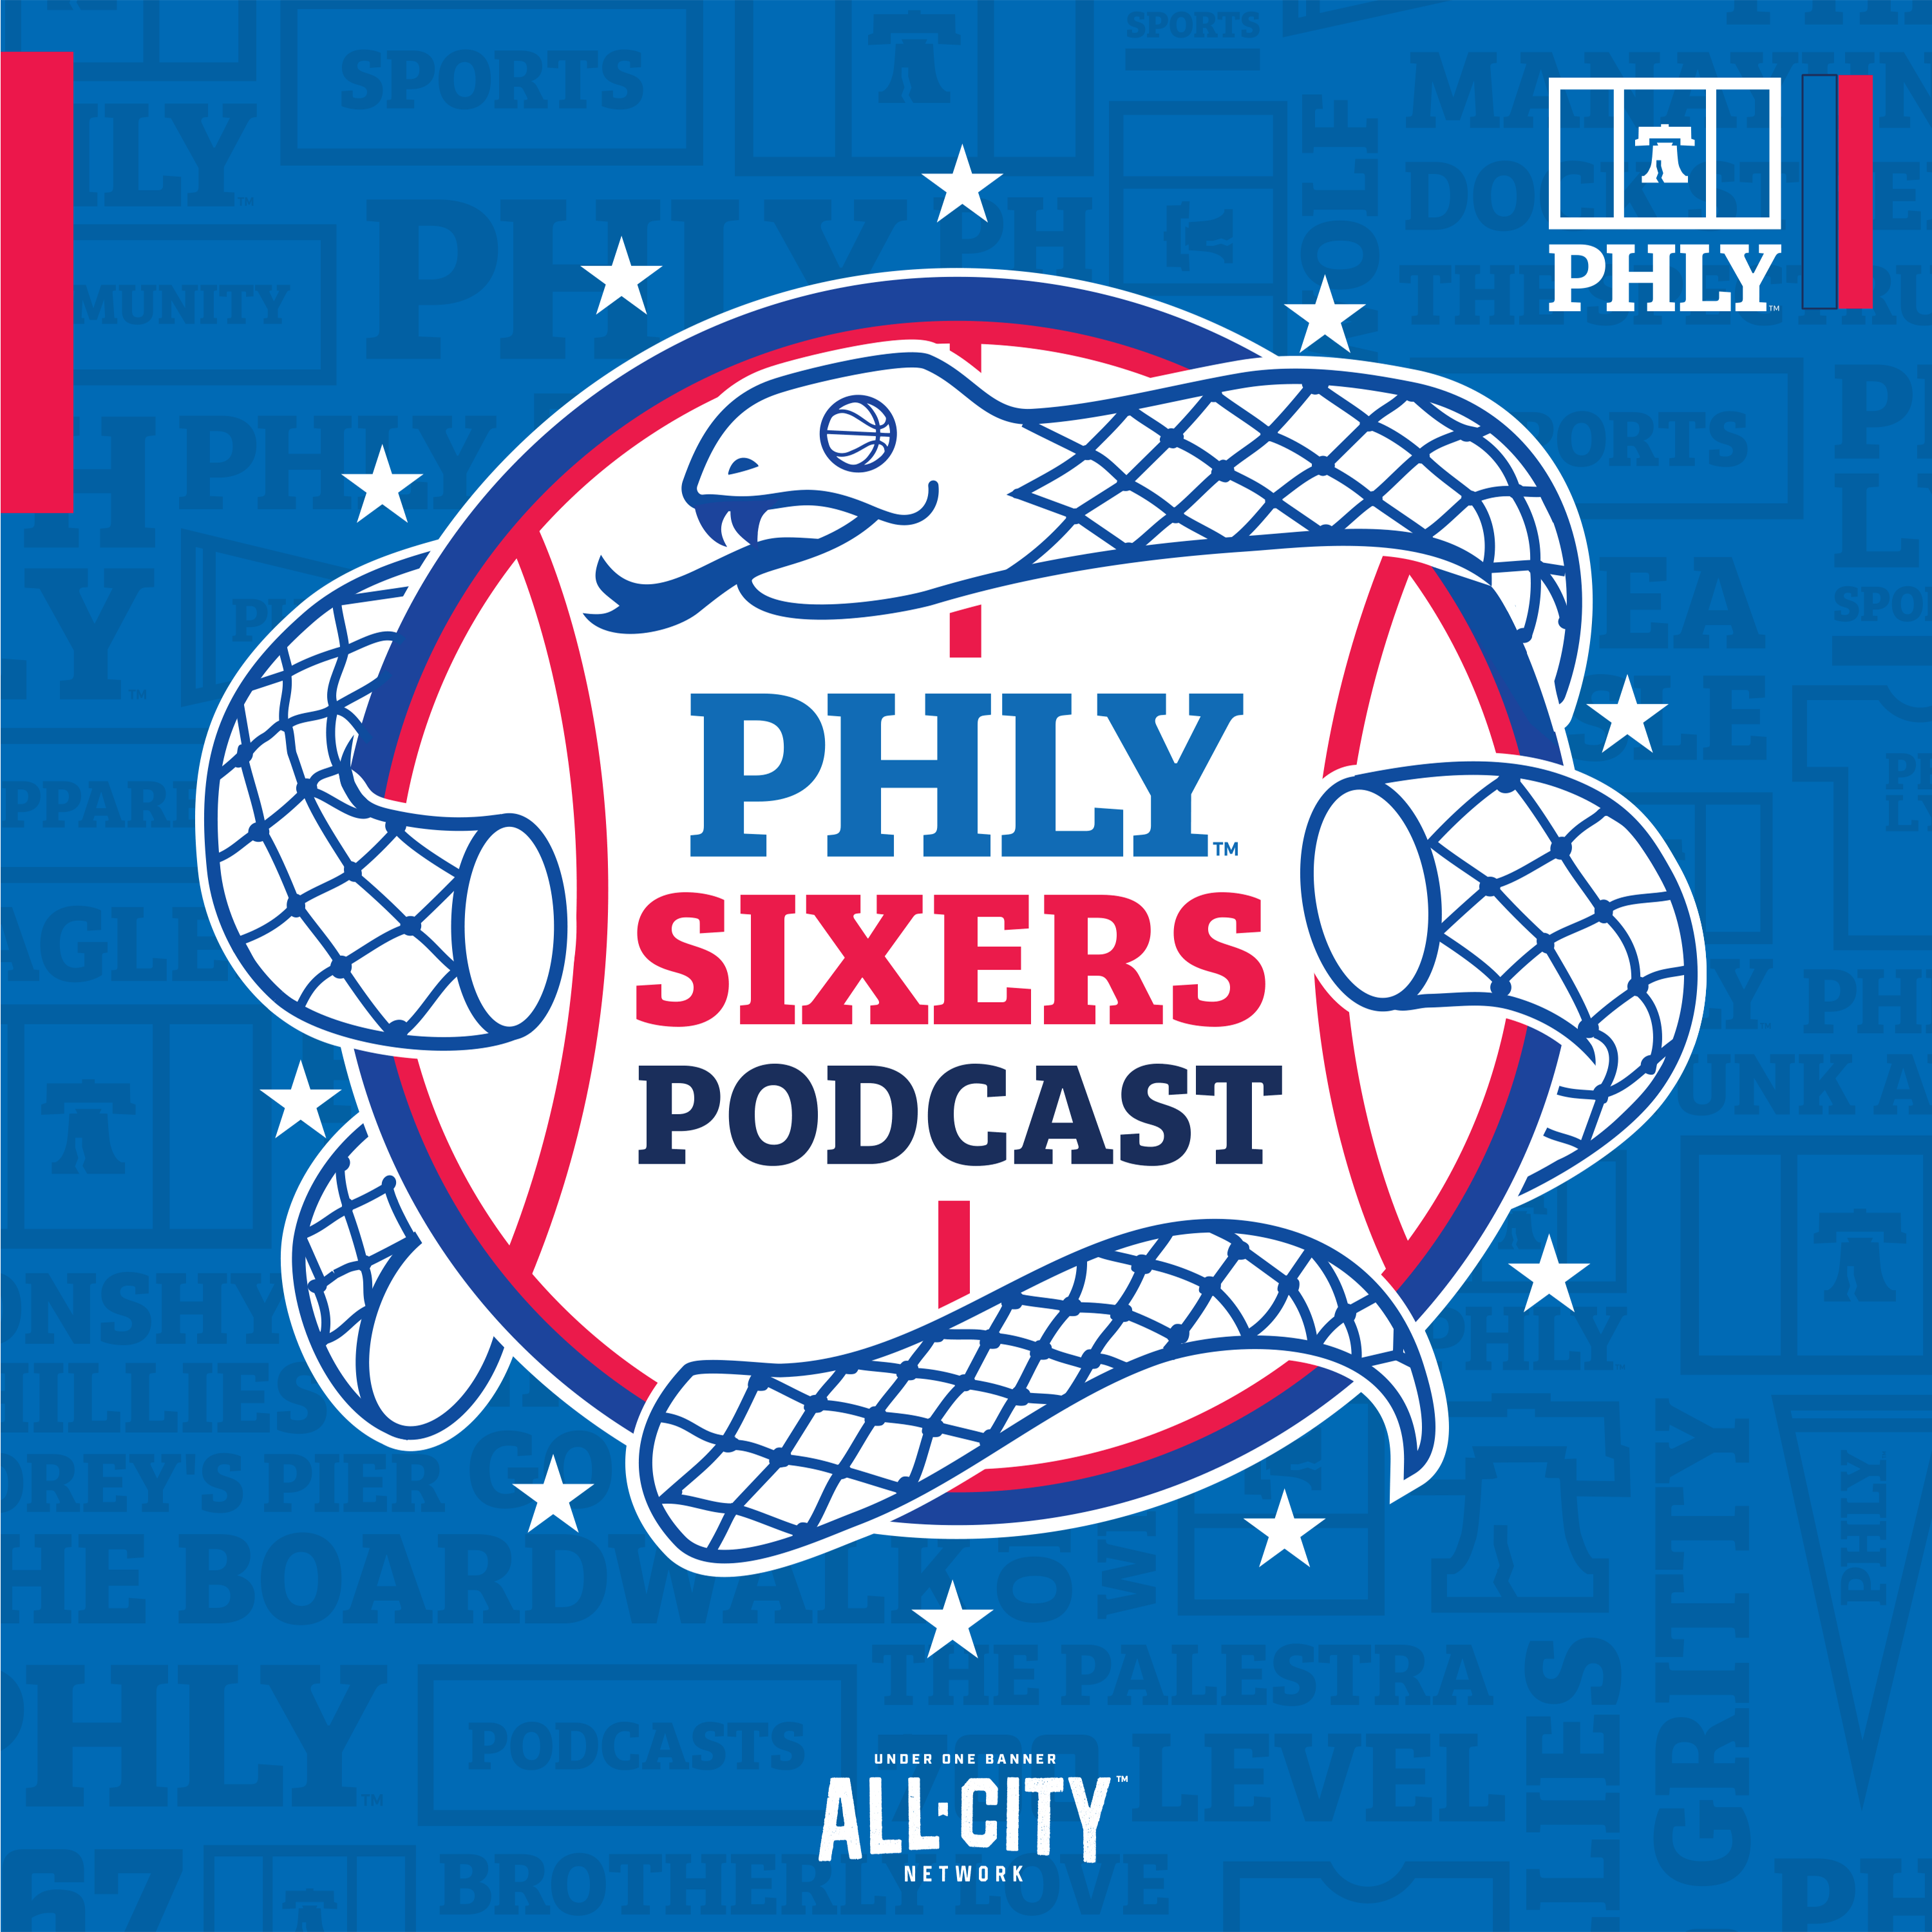 PHLY Sixers Podcast | Aaron Gordon transformed the Nuggets. Who could change the Sixers?